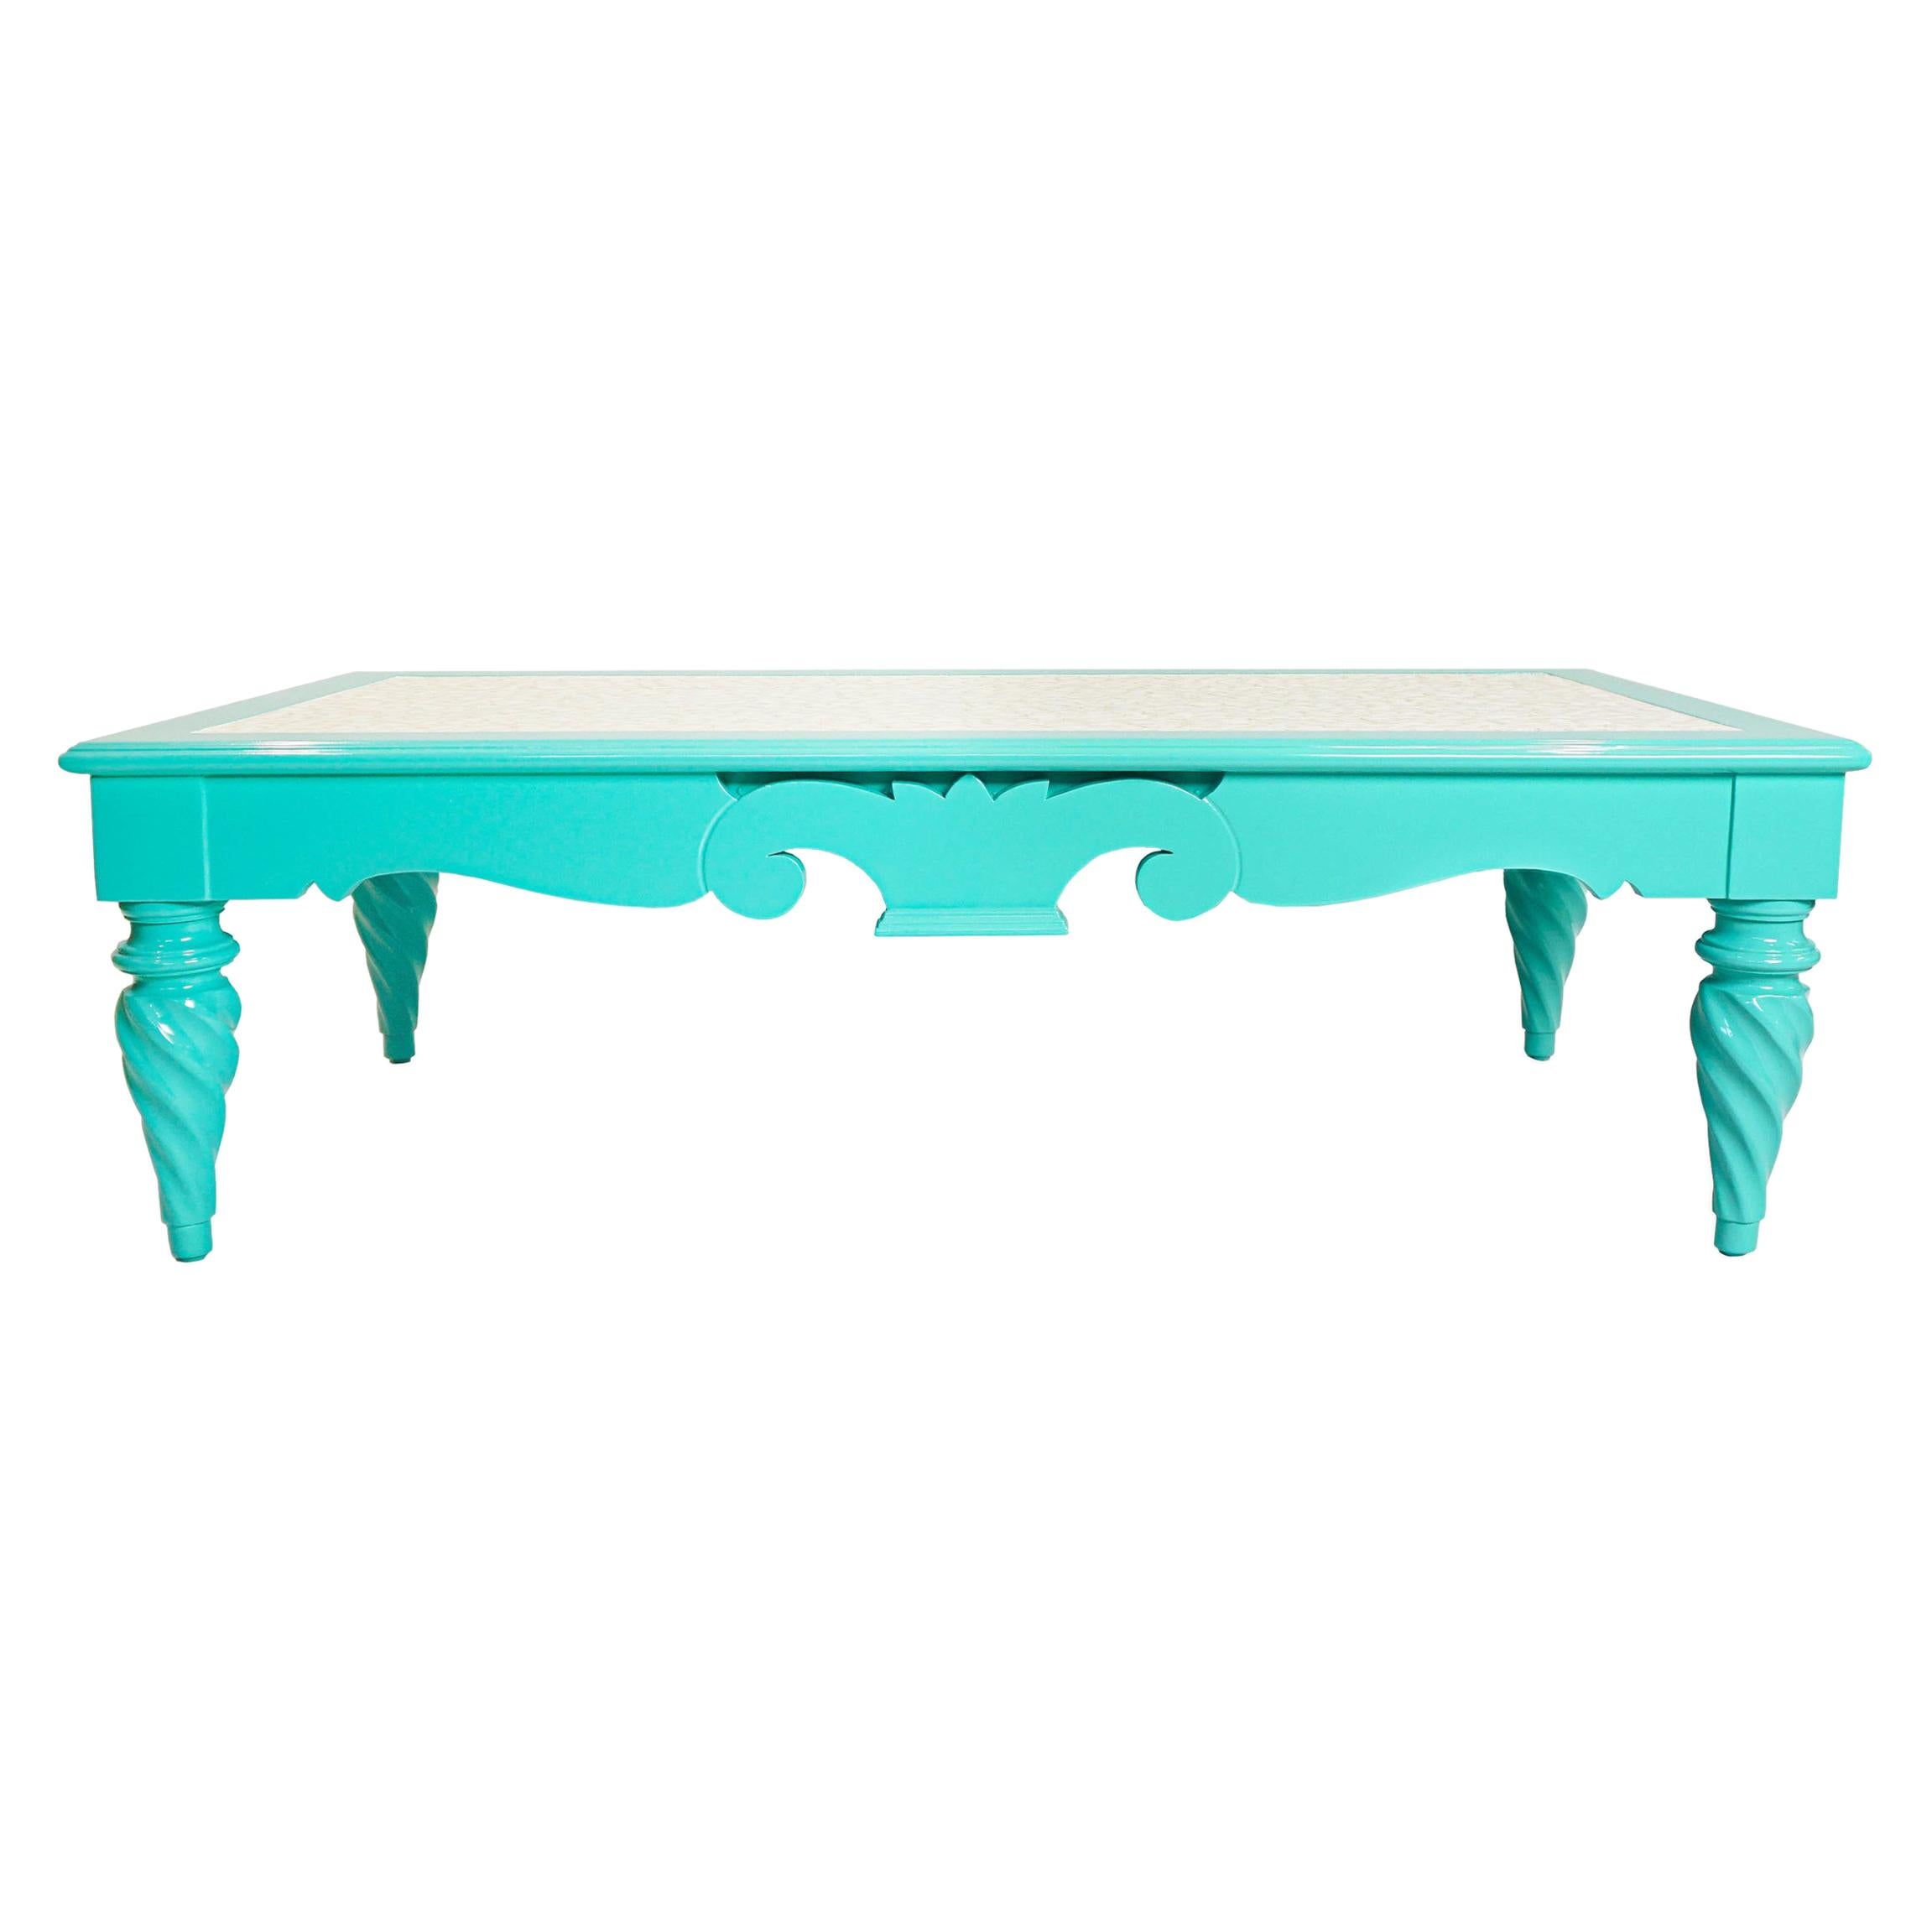 One-of-a-kind hard maple vintage coffee table reimagined. Lacquered in turquoise and topped in an inlaid mother-of-pearl paper with a protective finish. 

Measurements:
Overall: 48”W x 24”D x 15”H